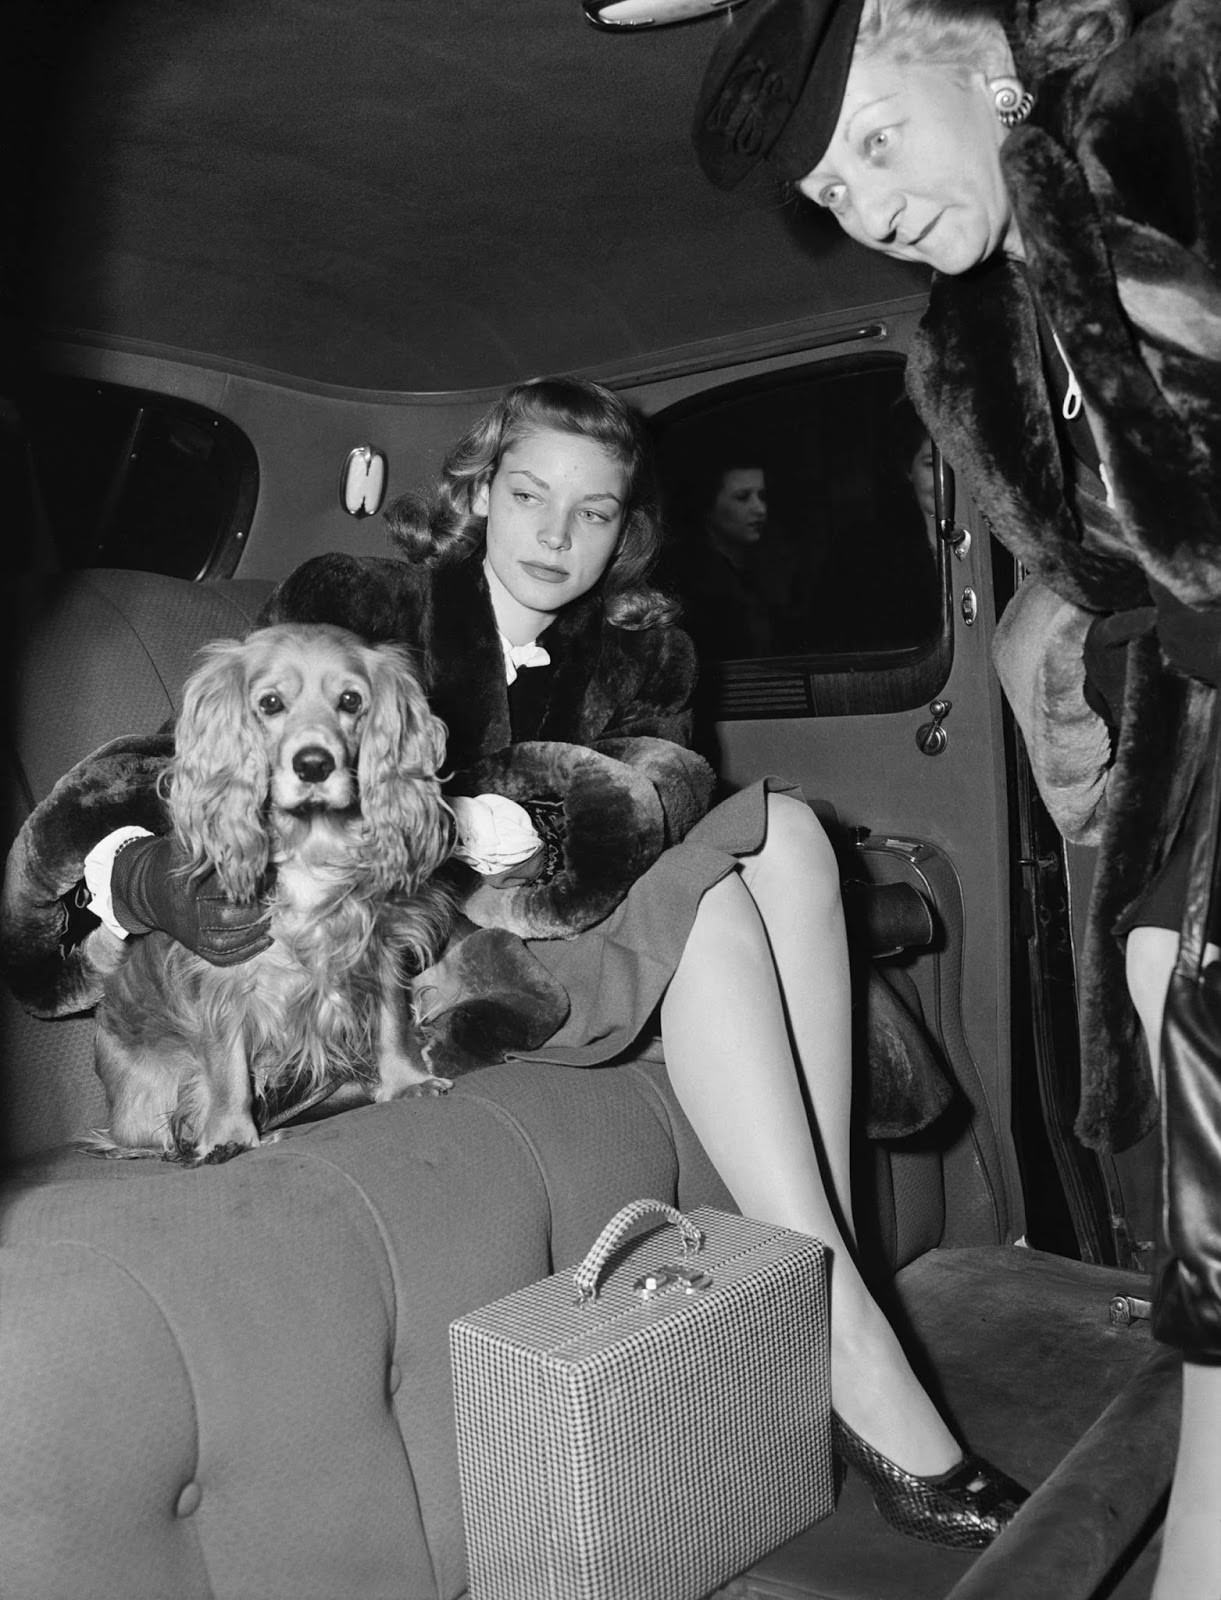 Traveling in style with her dog, 1945.